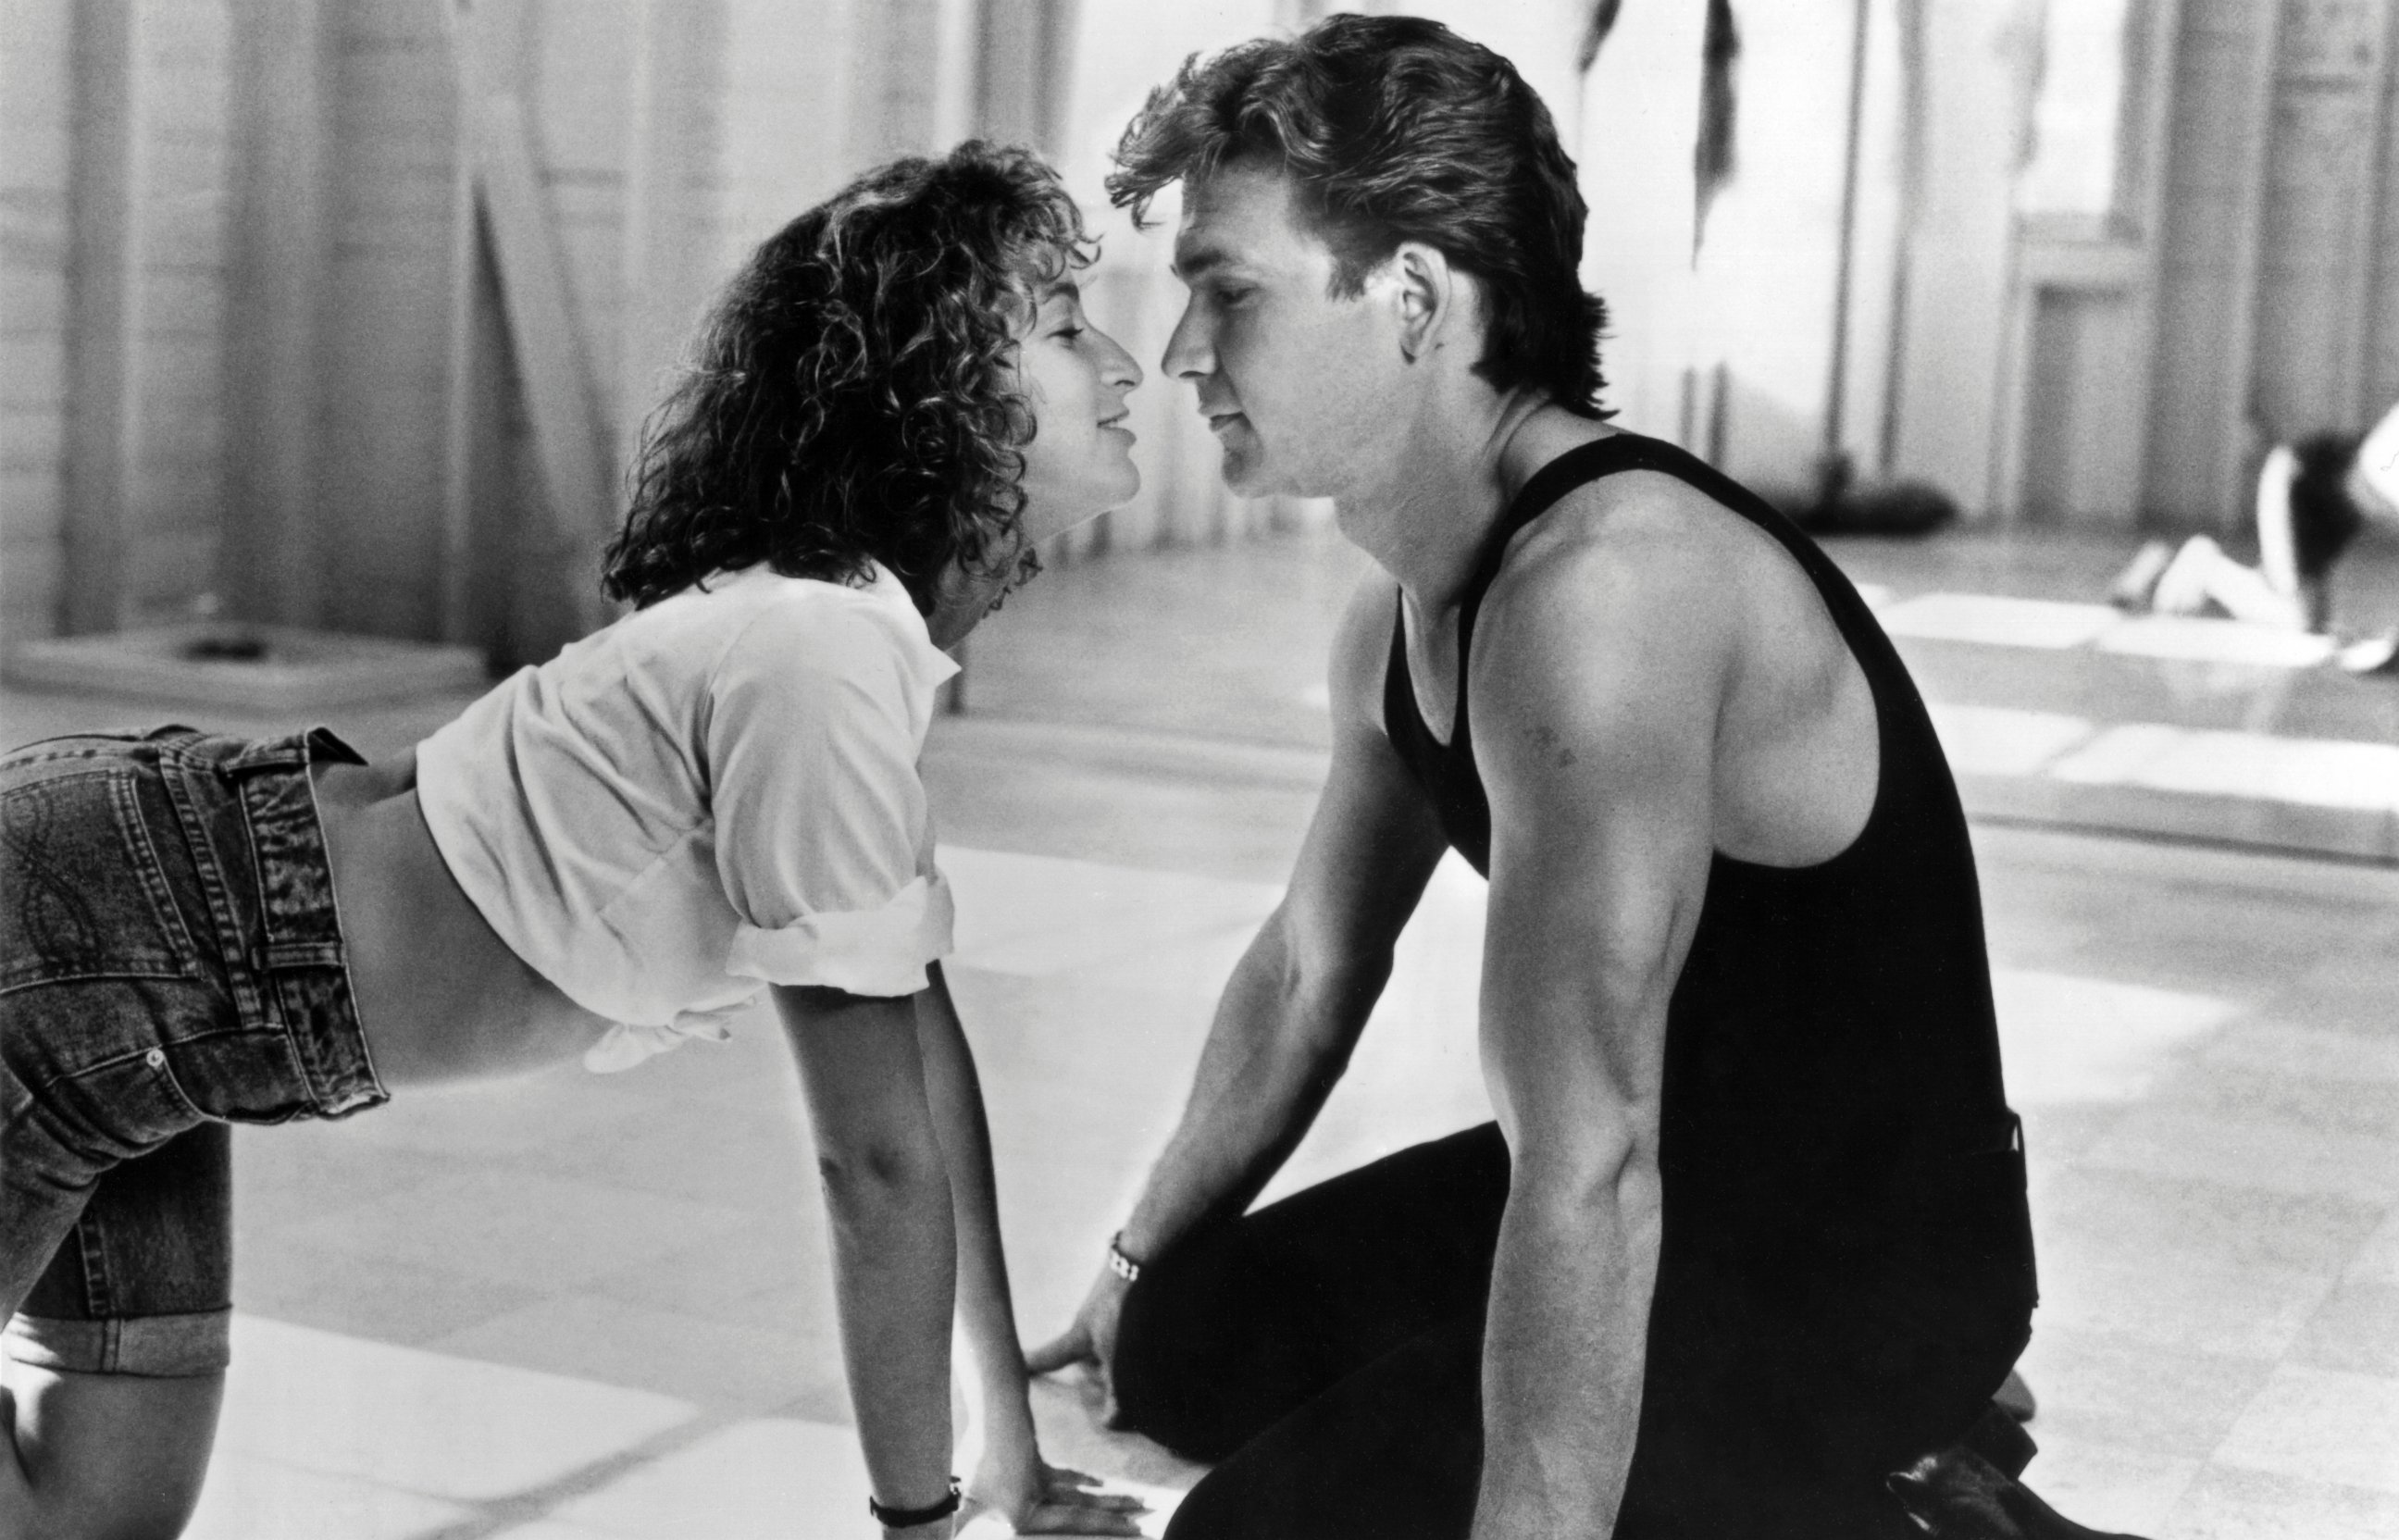 PHOTO: Jennifer Grey and Patrick Swayze in a scene from the movie, "Dirty Dancing." 